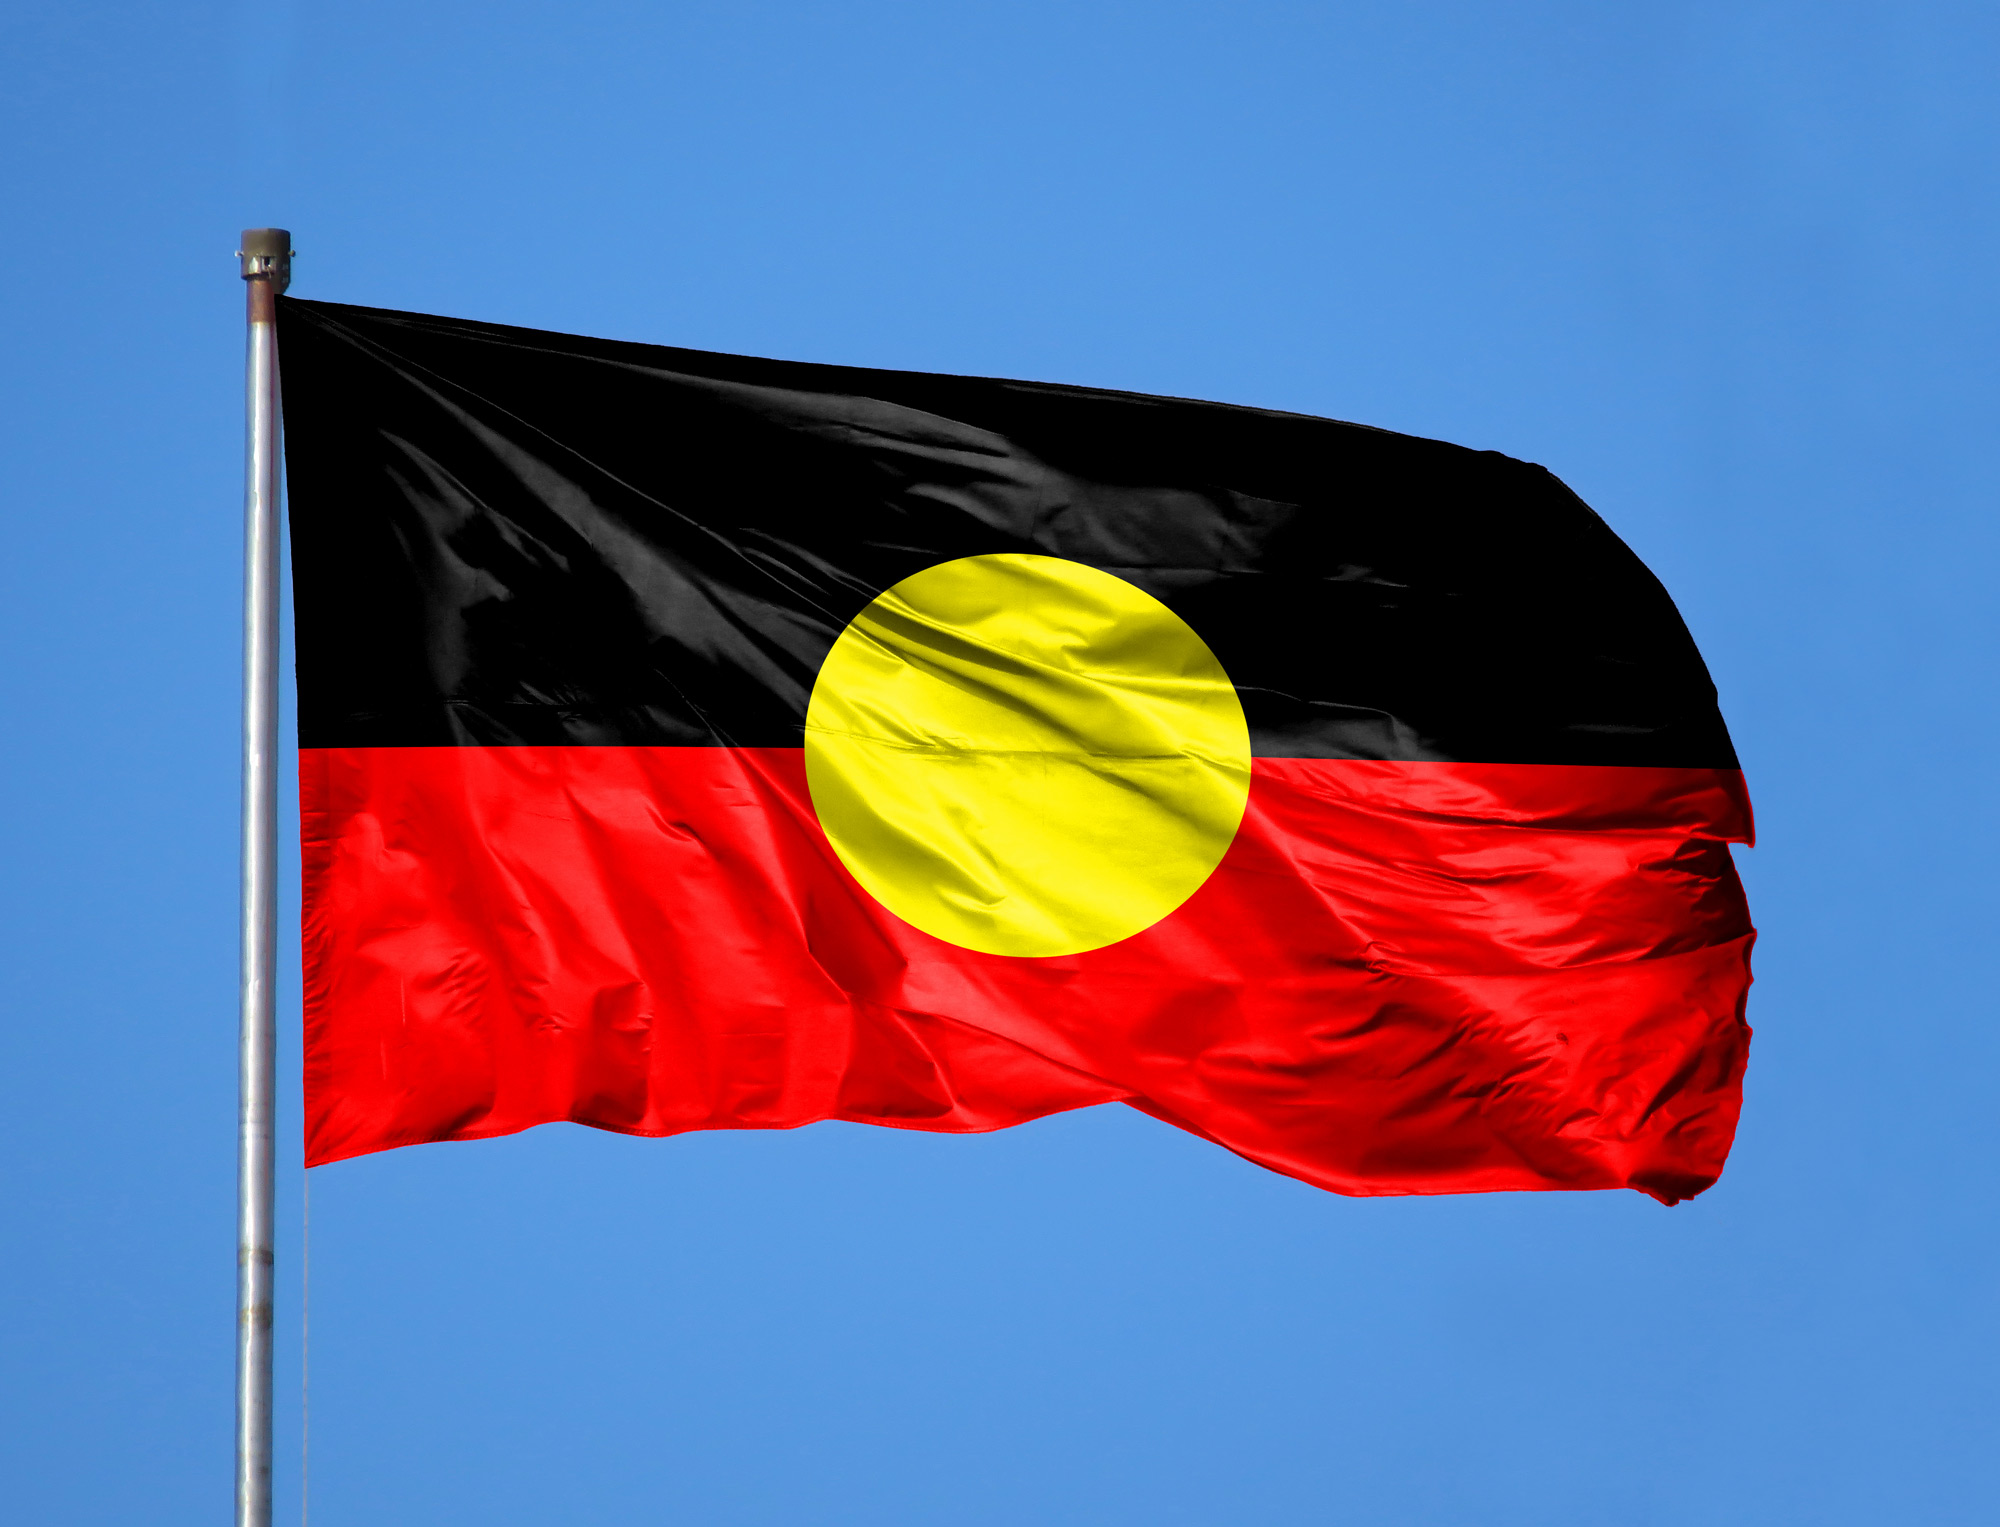 Freeing the flag: the Aboriginal flag and copyright